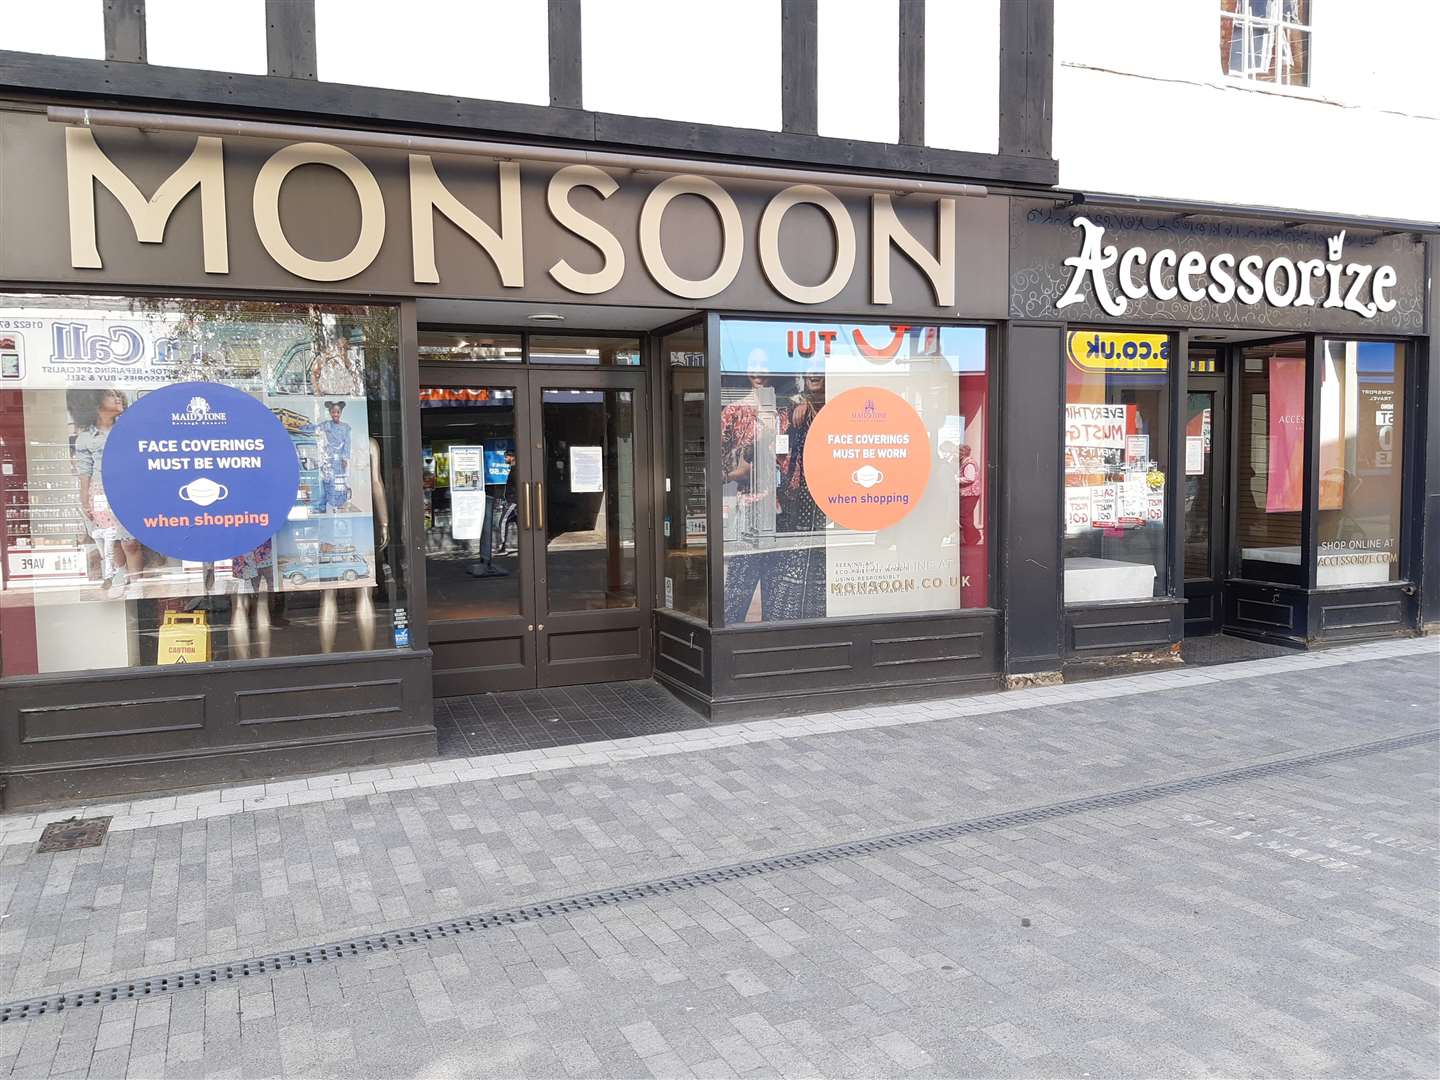 Monsoon and Accesorize in Week Street have closed